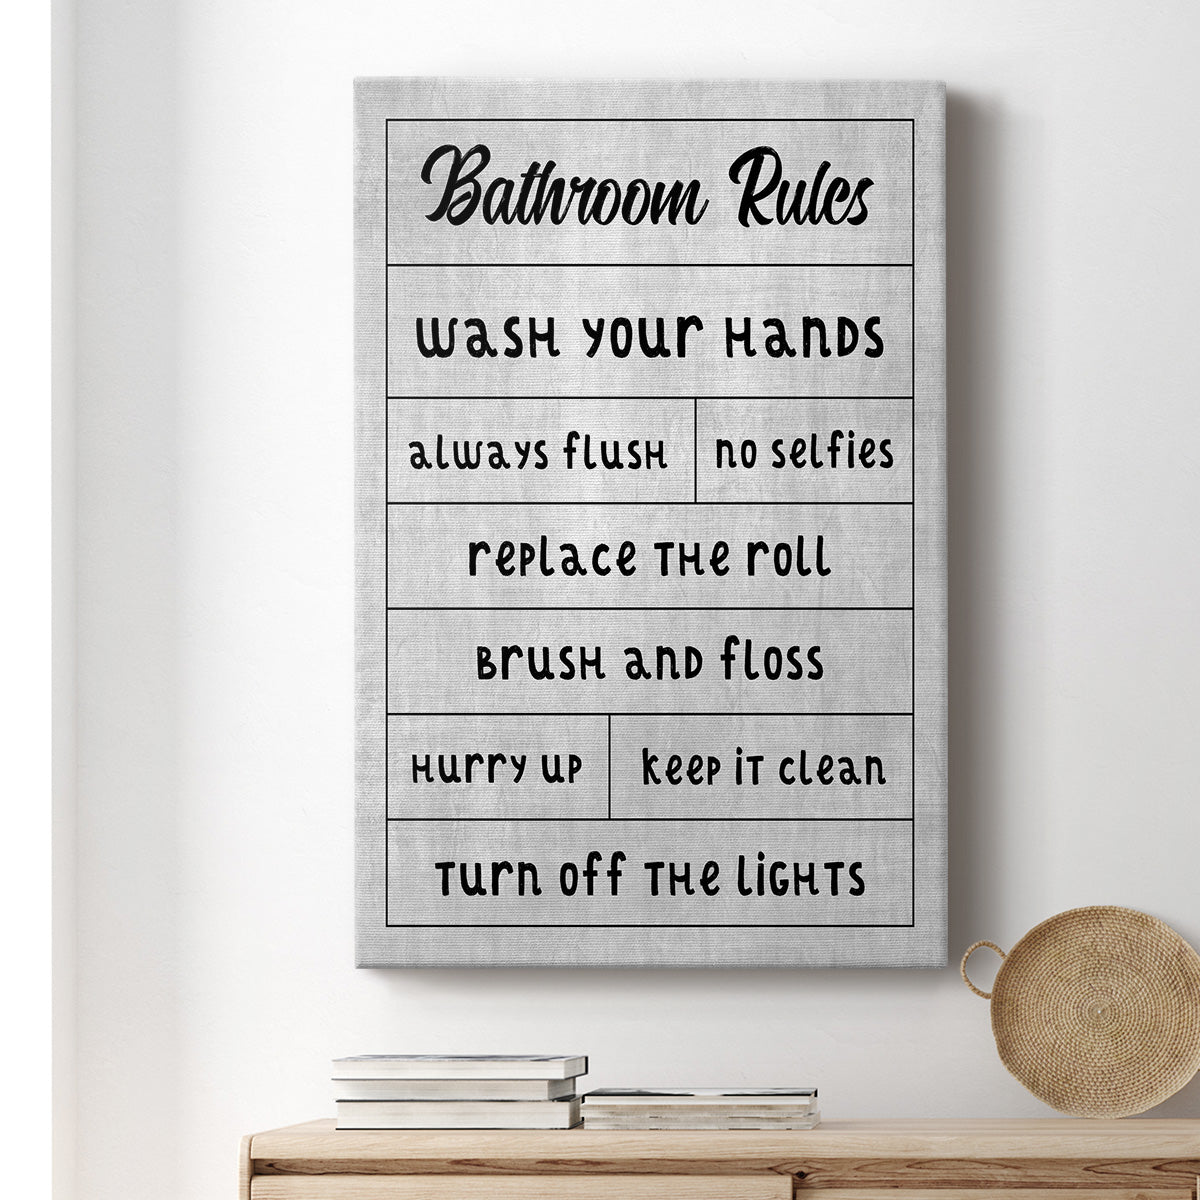 Simple Bathroom Rules Premium Gallery Wrapped Canvas - Ready to Hang